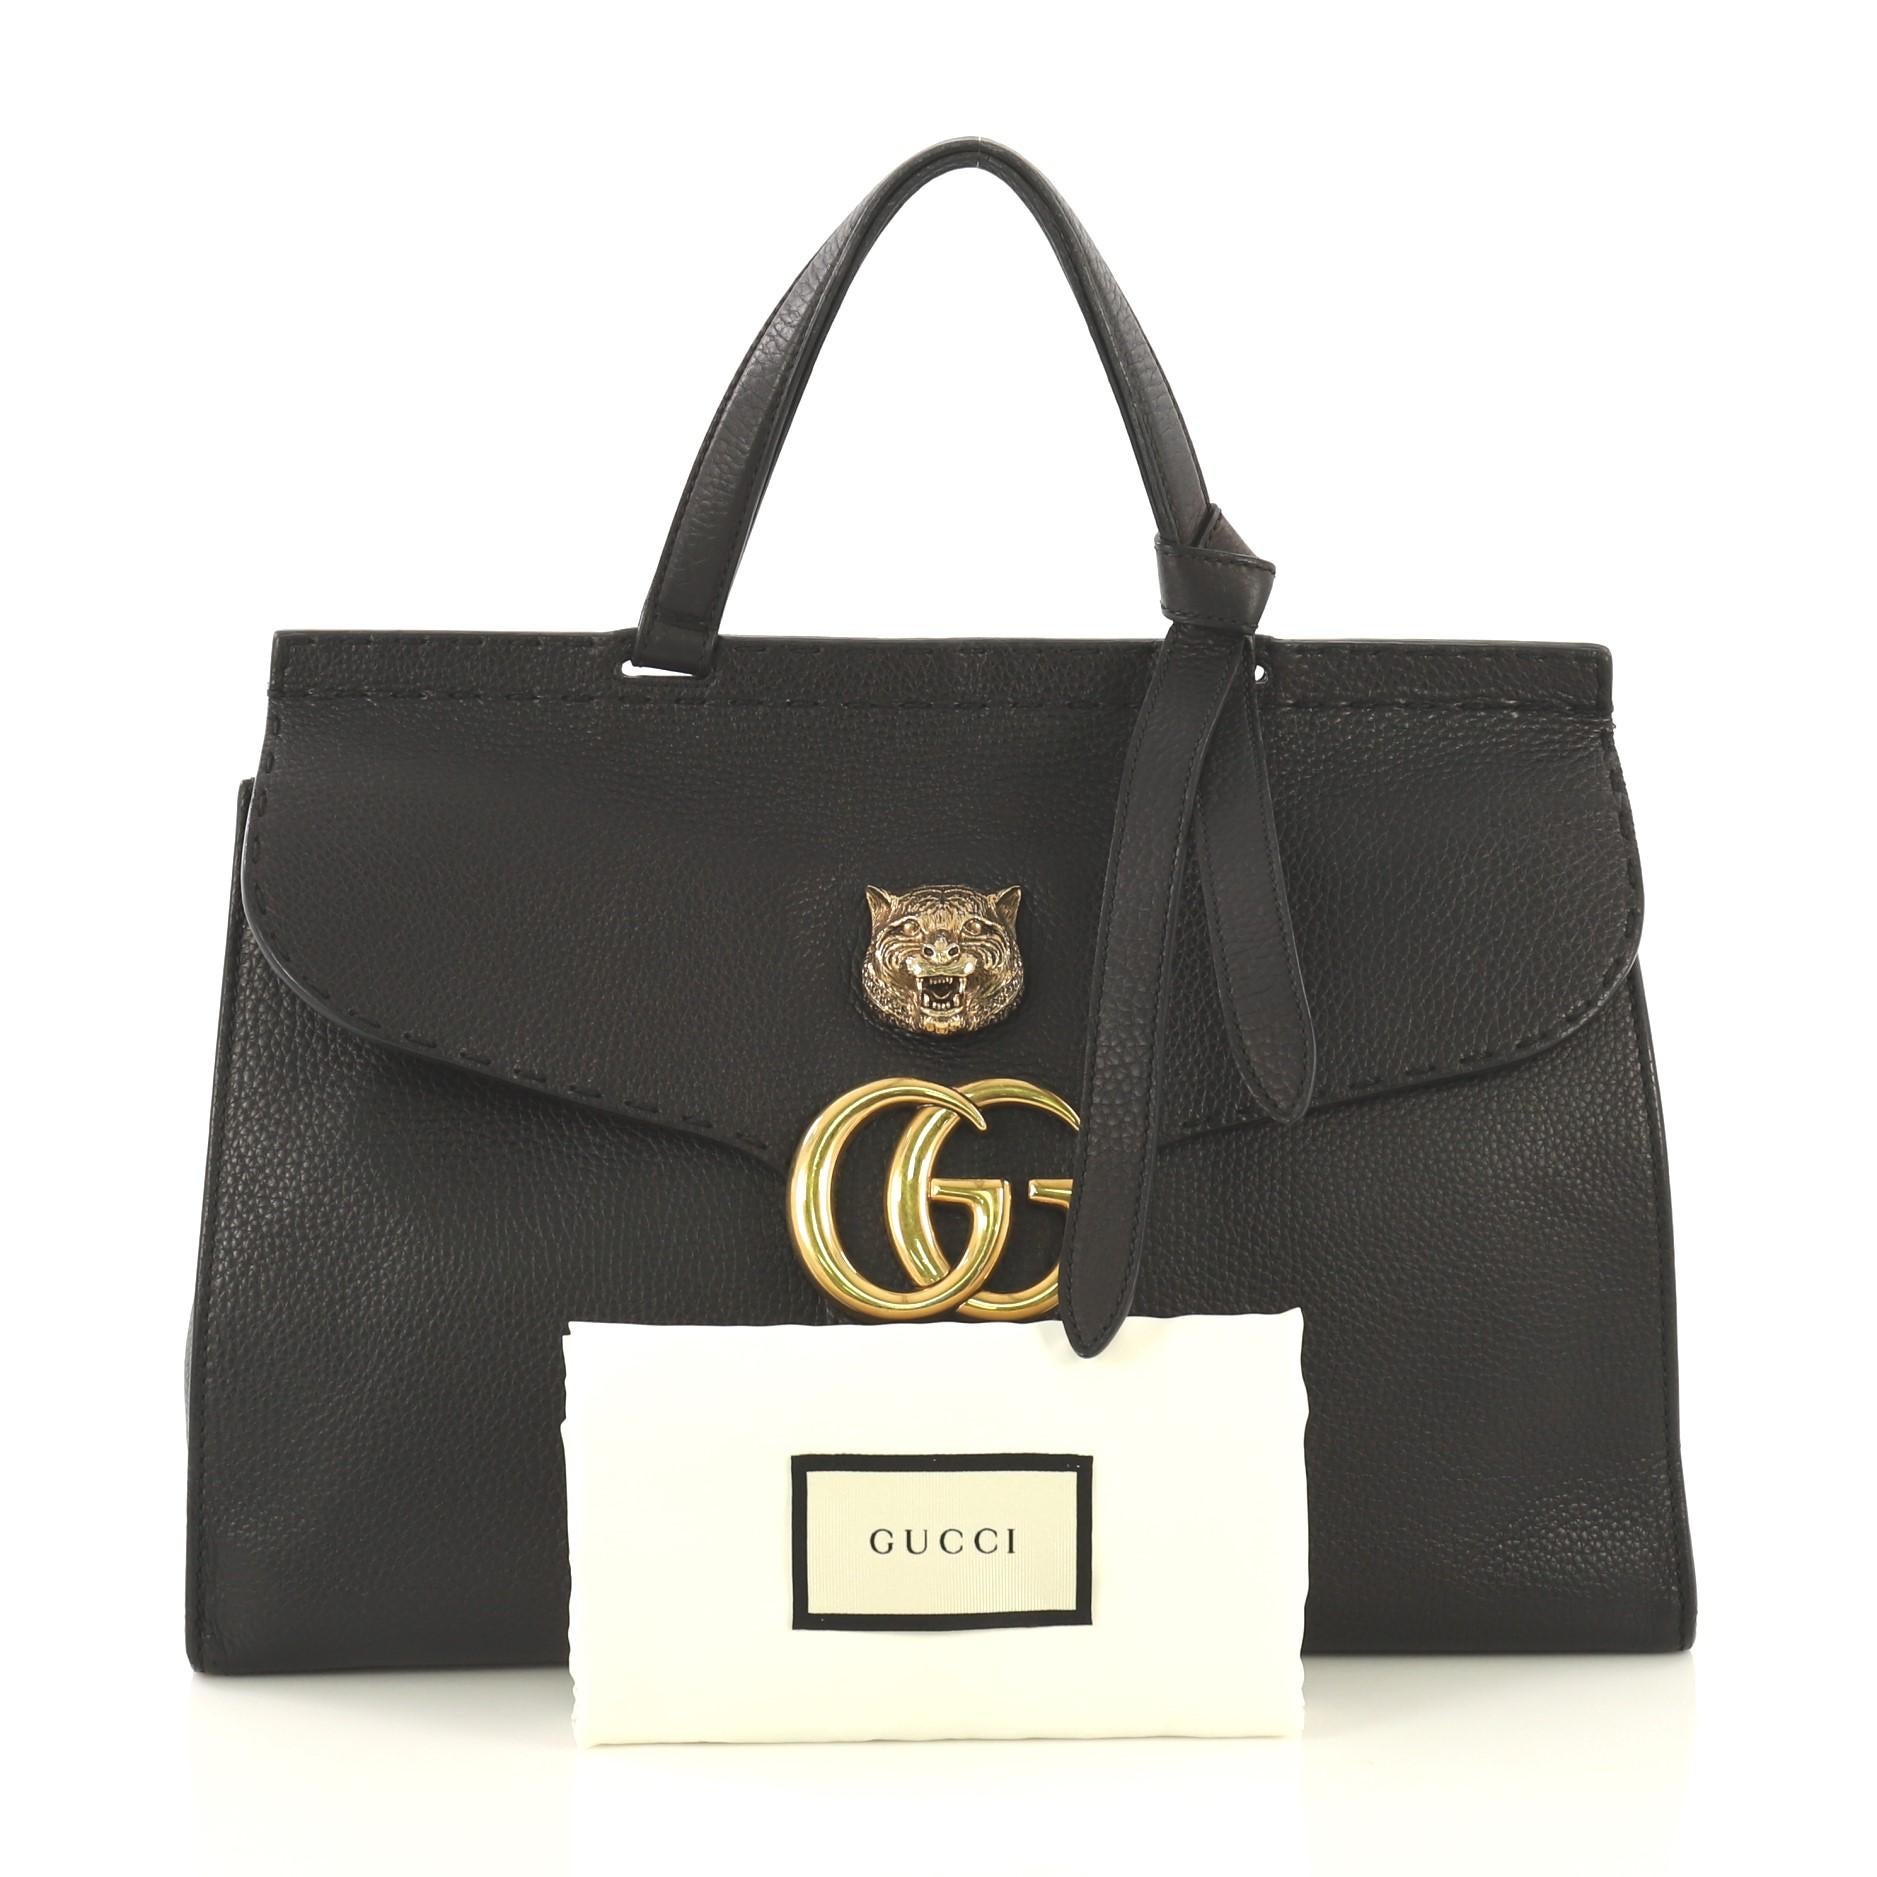 This Gucci GG Marmont Animalier Top Handle Bag Leather Medium, crafted from black leather, features flat top handle with knot on one end, flap with GG logo and animalier detail on top, stitching detail, and aged gold-tone hardware. Its push-lock